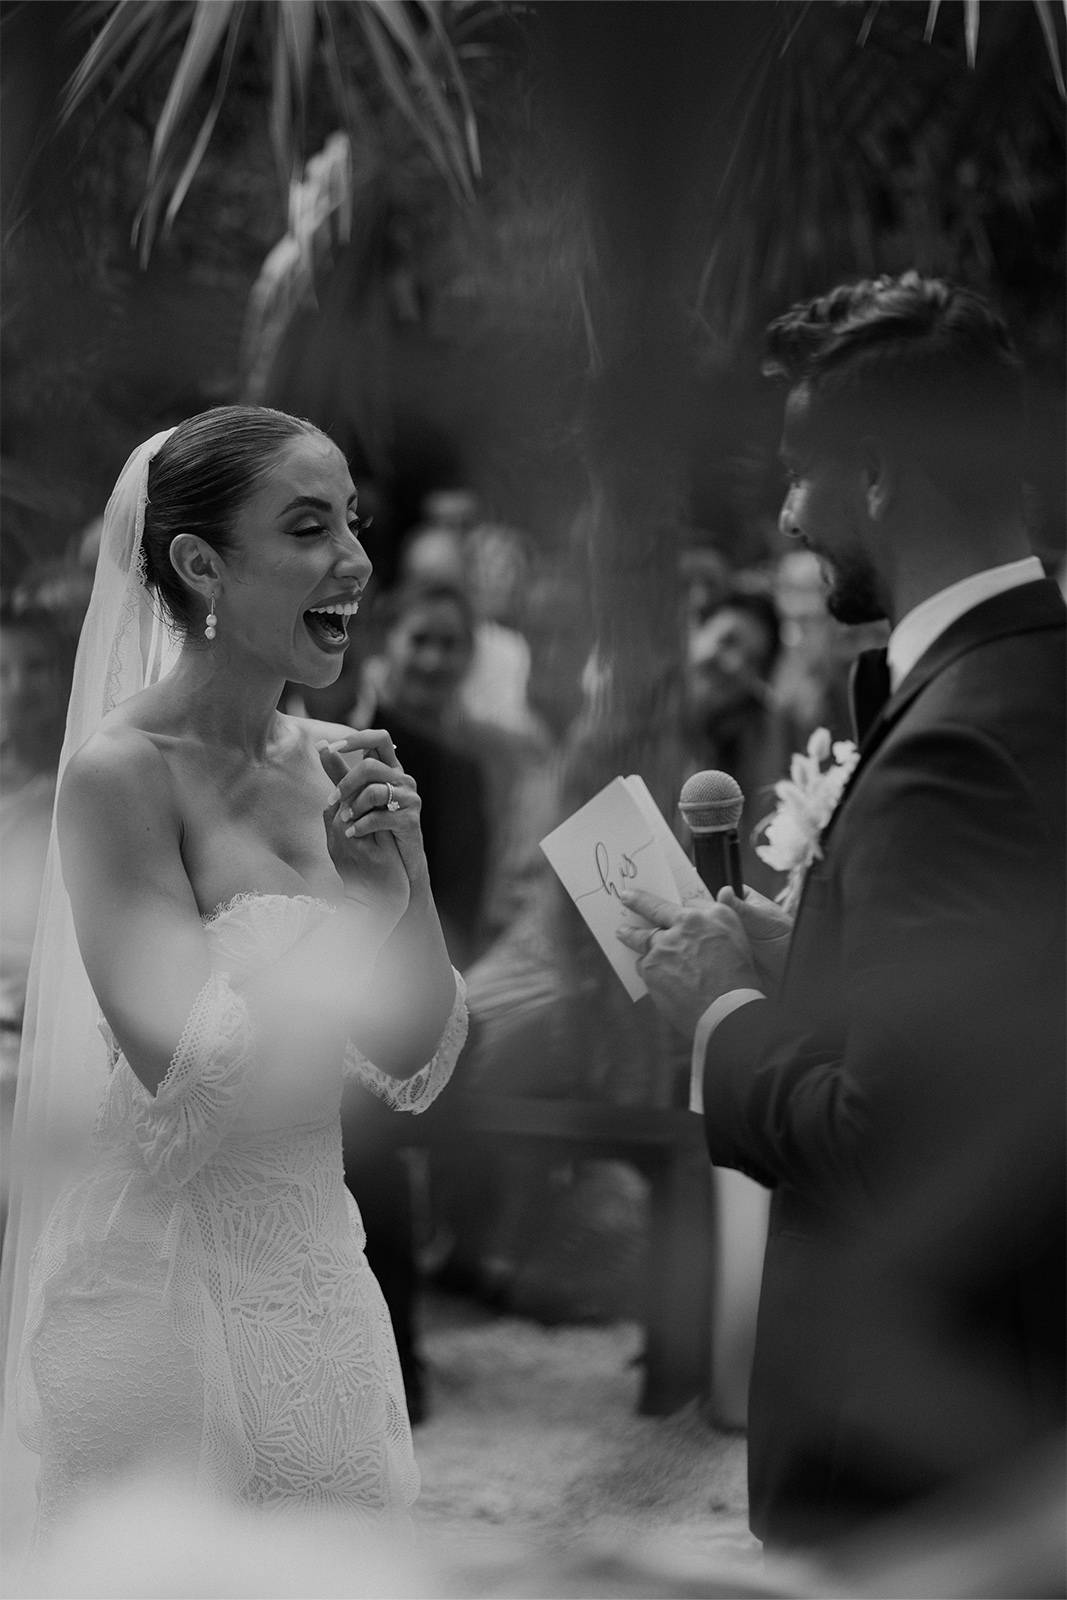 Bride laughing at the groom's vows